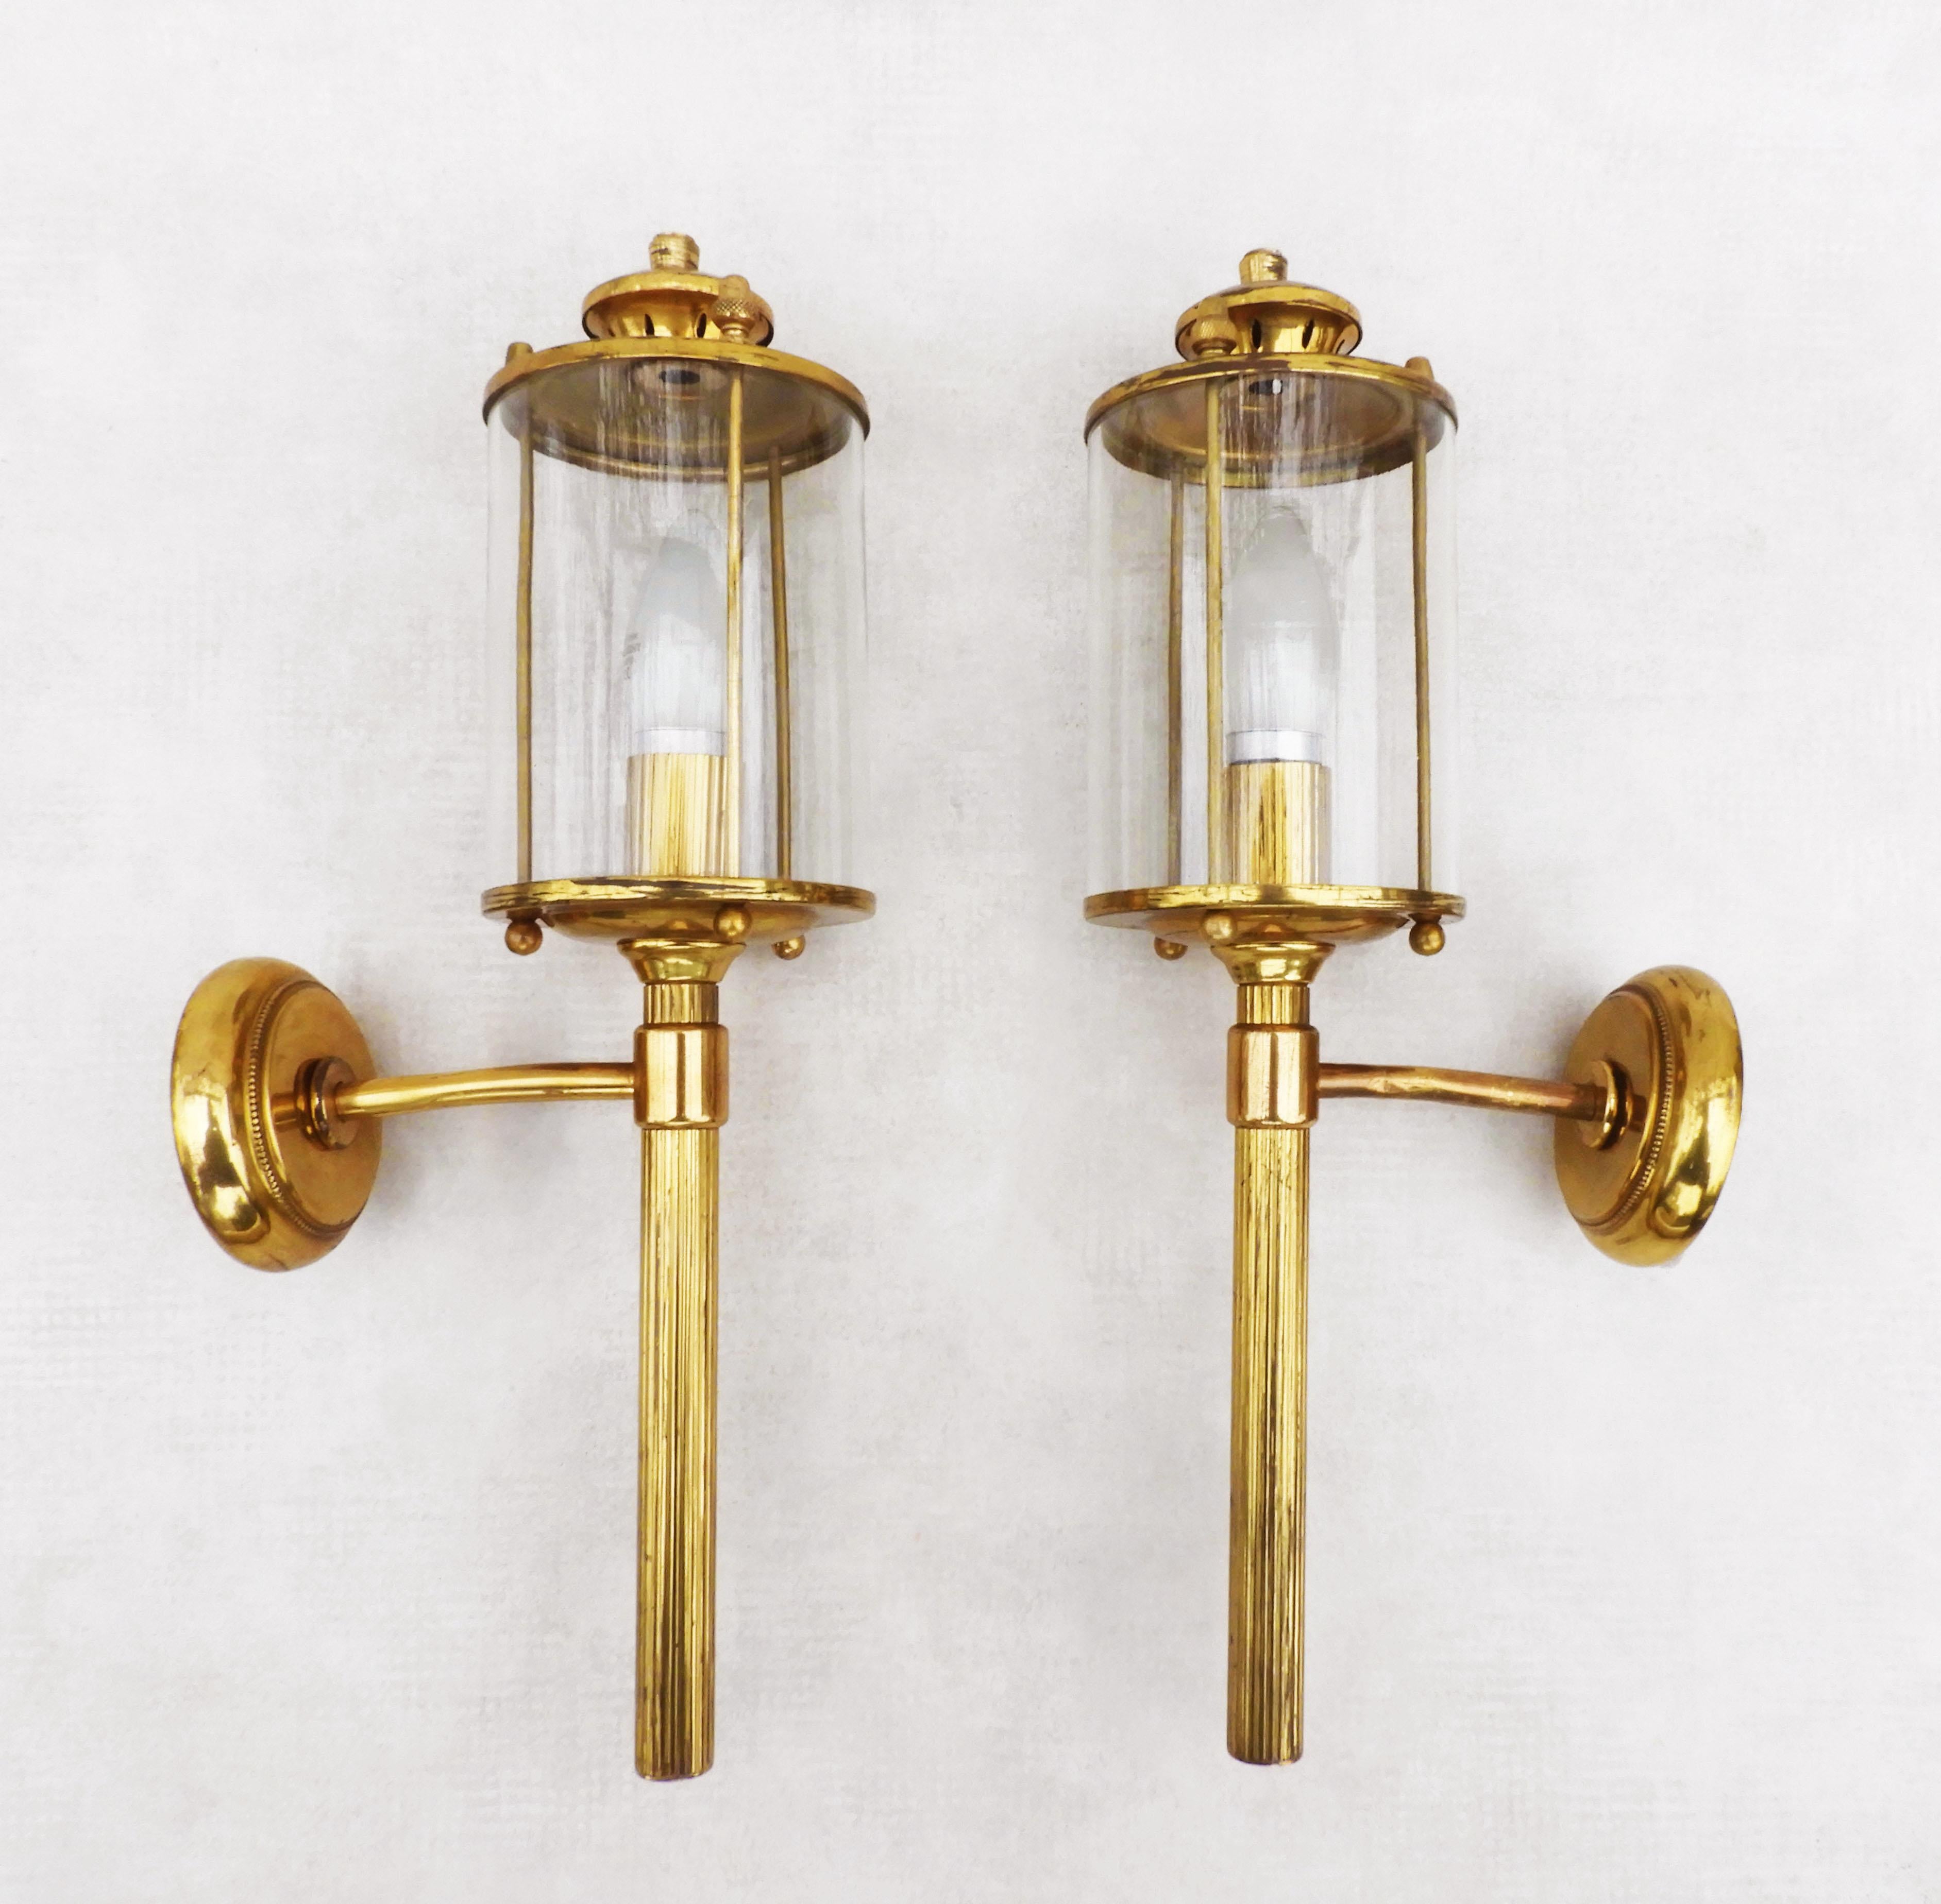 20th Century Pair of French Neoclassical Maison Jansen Style Brass Wall Sconce Lanterns C1950